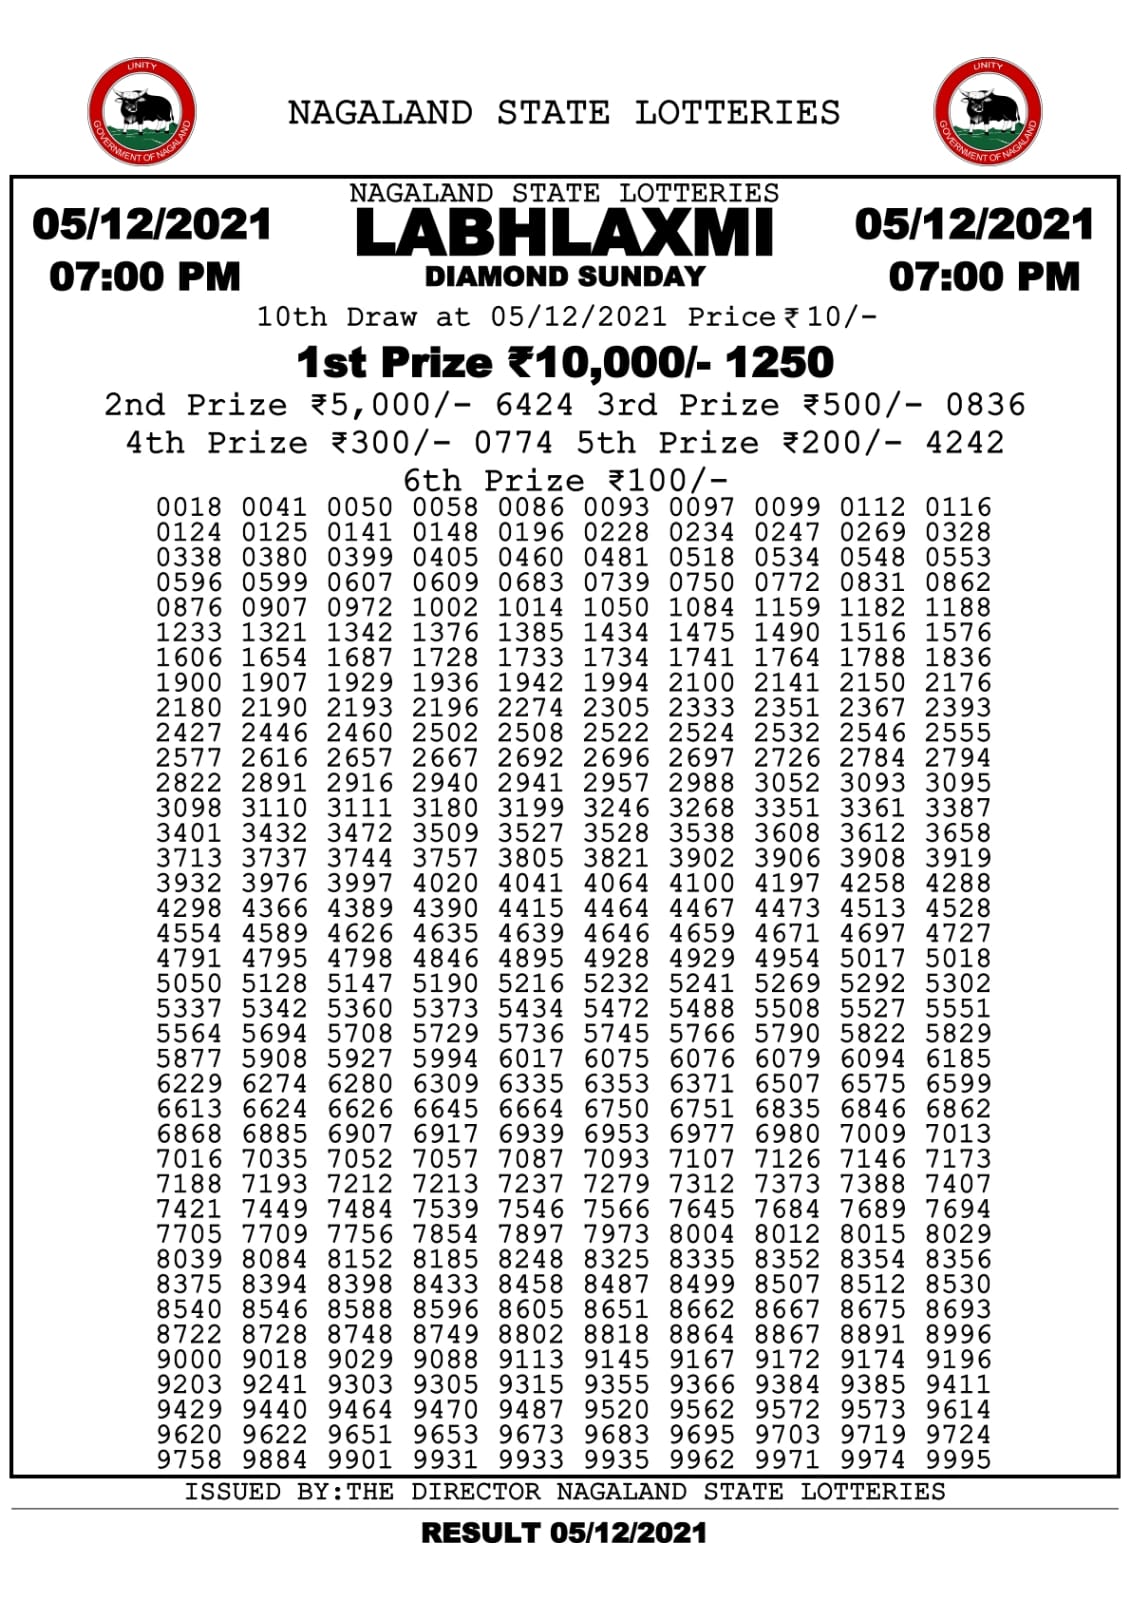 Labhlaxmi 7.00pm Lottery Result 05.12.2021